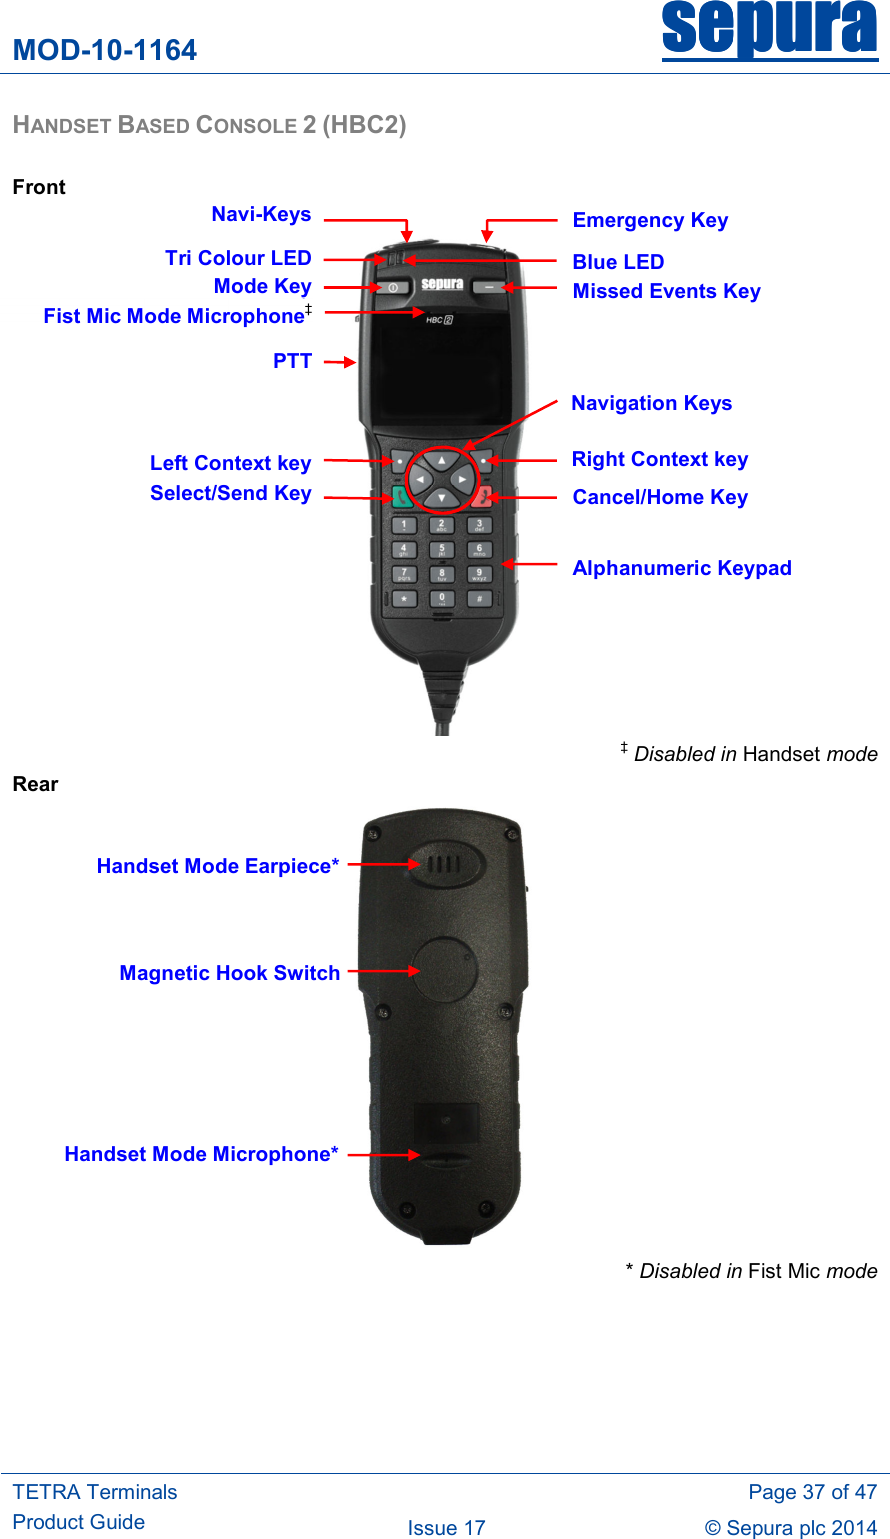 MOD-10-1164 sepurasepurasepurasepura     TETRA Terminals Product Guide   Page 37 of 47 Issue 17  © Sepura plc 2014   HANDSET BASED CONSOLE 2 (HBC2)  Front     ‡ Disabled in Handset mode Rear  * Disabled in Fist Mic mode  Navi-KeysPTTEmergency Key Cancel/Home Key Alphanumeric Keypad Select/Send KeyNavigation Keys Mode KeyHandset Mode Earpiece* Handset Mode Microphone*Missed Events Key Blue LED Tri Colour LEDRight Context key Left Context keyMagnetic Hook SwitchFist Mic Mode Microphone‡